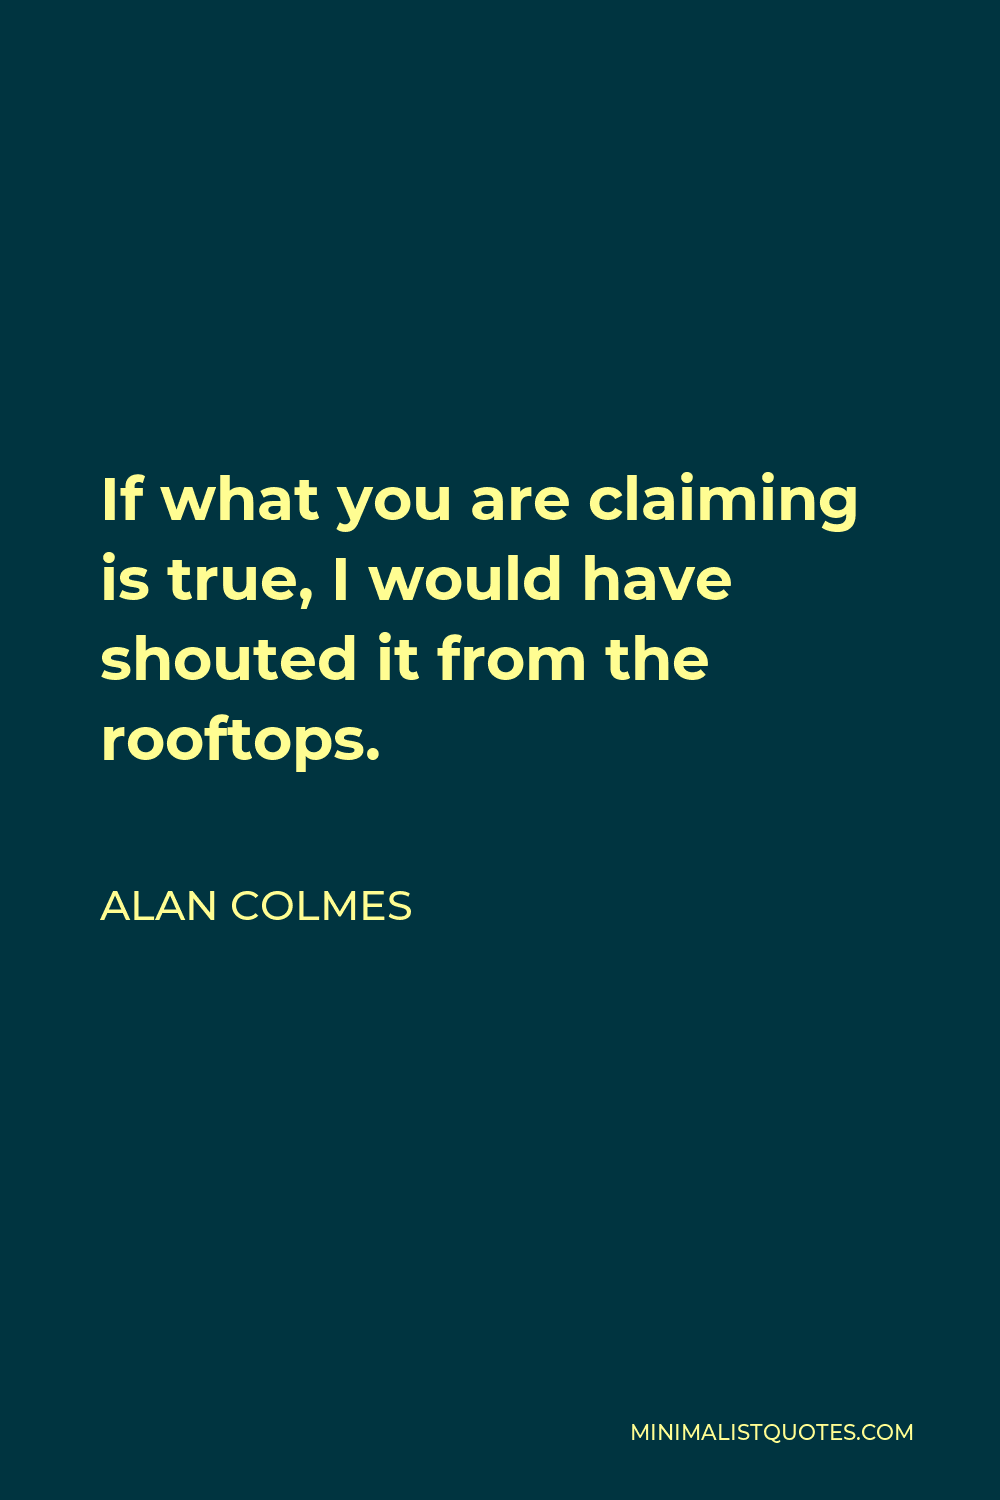 Alan Colmes Quote - If what you are claiming is true, I would have shouted it from the rooftops.